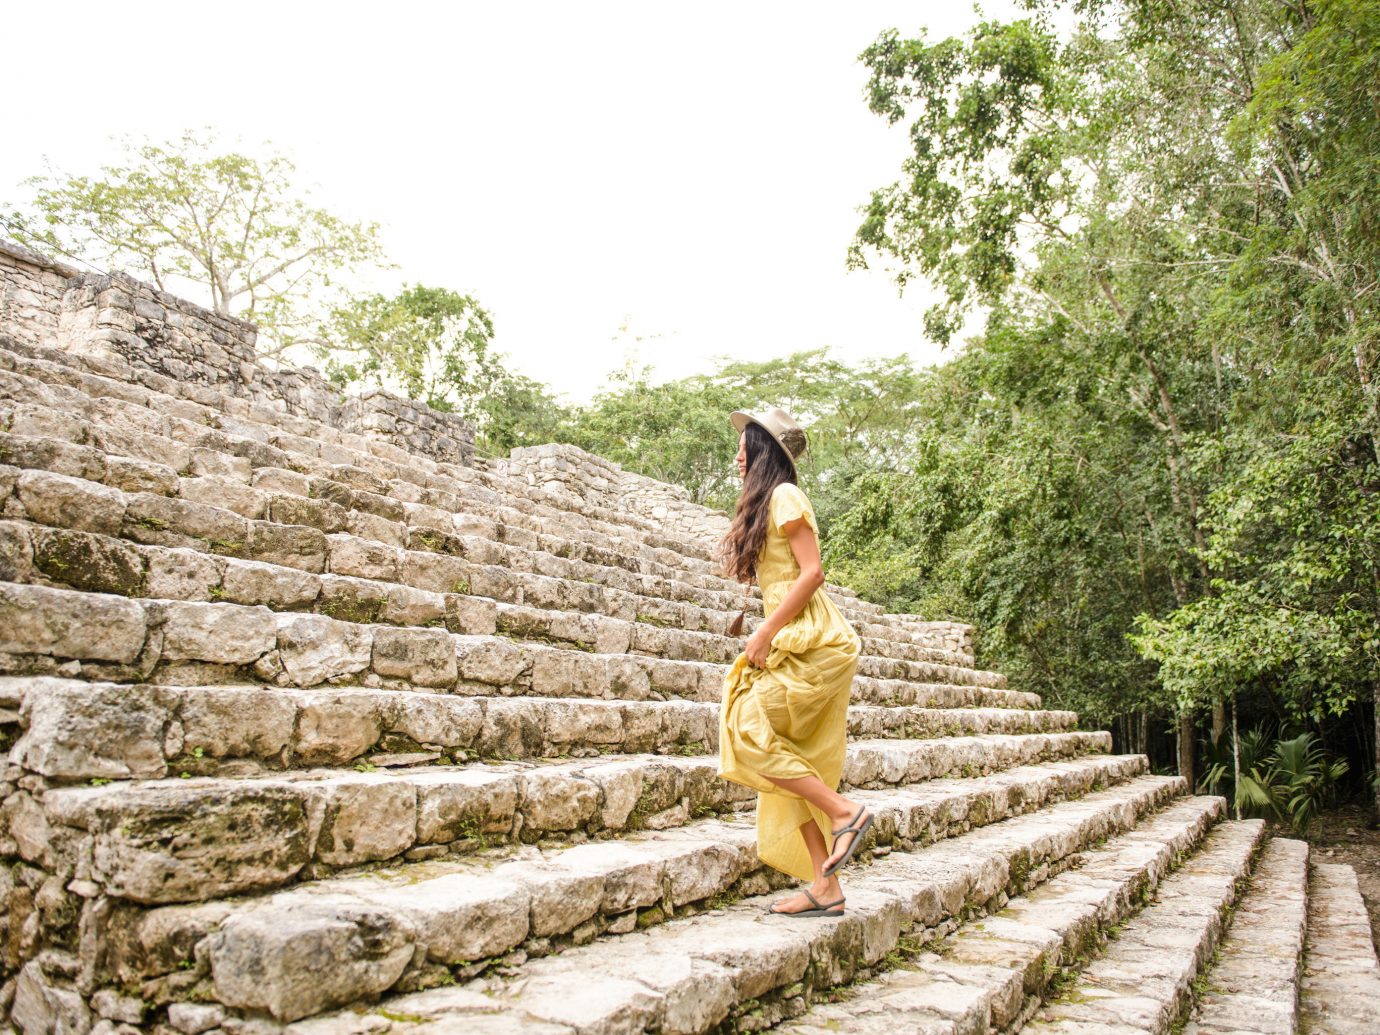 City Mexico Trip Ideas Tulum outdoor tree rock temple outdoor structure girl tourism sky grass leisure archaeological site recreation stone